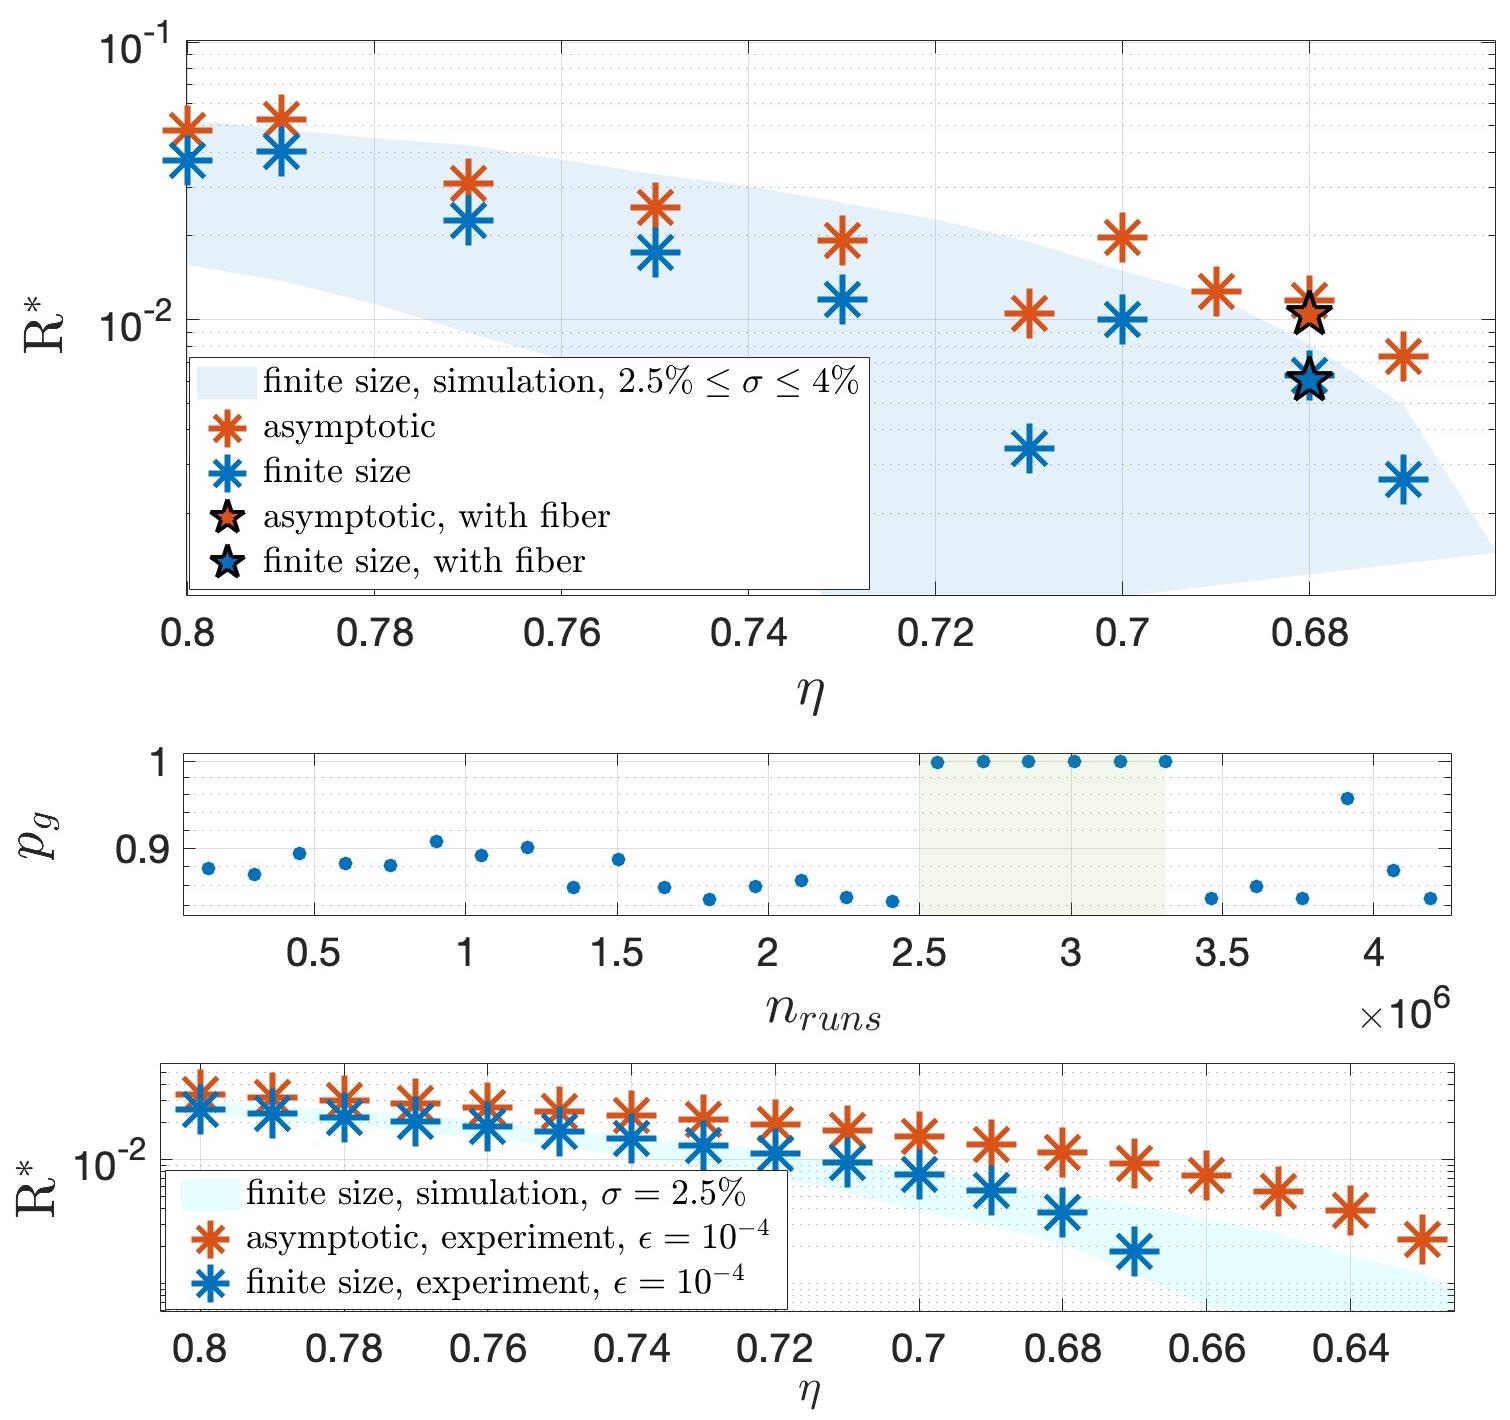 Experimental results. (Top) Key rate R as a function of the transmission ? for the protocol with n = 2 states. Each point represents a run over half an hour, with finite-size bound on the guessing probability (blue), and in the asymptotic regime (red). Data taken with 4.8 km fiber corresponds to blue and red stars. Data is consistent with Monte Carlo simulations with polarization fluctuations 2.5% = s = 4% (blue region, estimated from data). (Middle) Illustration of the self-testing feature of the protocol. After 2.5 hours of operation, we artificially lower the detection efficiency of the SNSPD (shaded region), resulting in a guessing probability pg for Eve that jumps to one, hence R = 0. Later, the SNSPD’s efficiency is brought back to normal, hence pg < 1 again and R > 0. (Bottom) Key rate R vs transmission ? for the protocol with n = 3 states, showing enhanced robustness to losses.